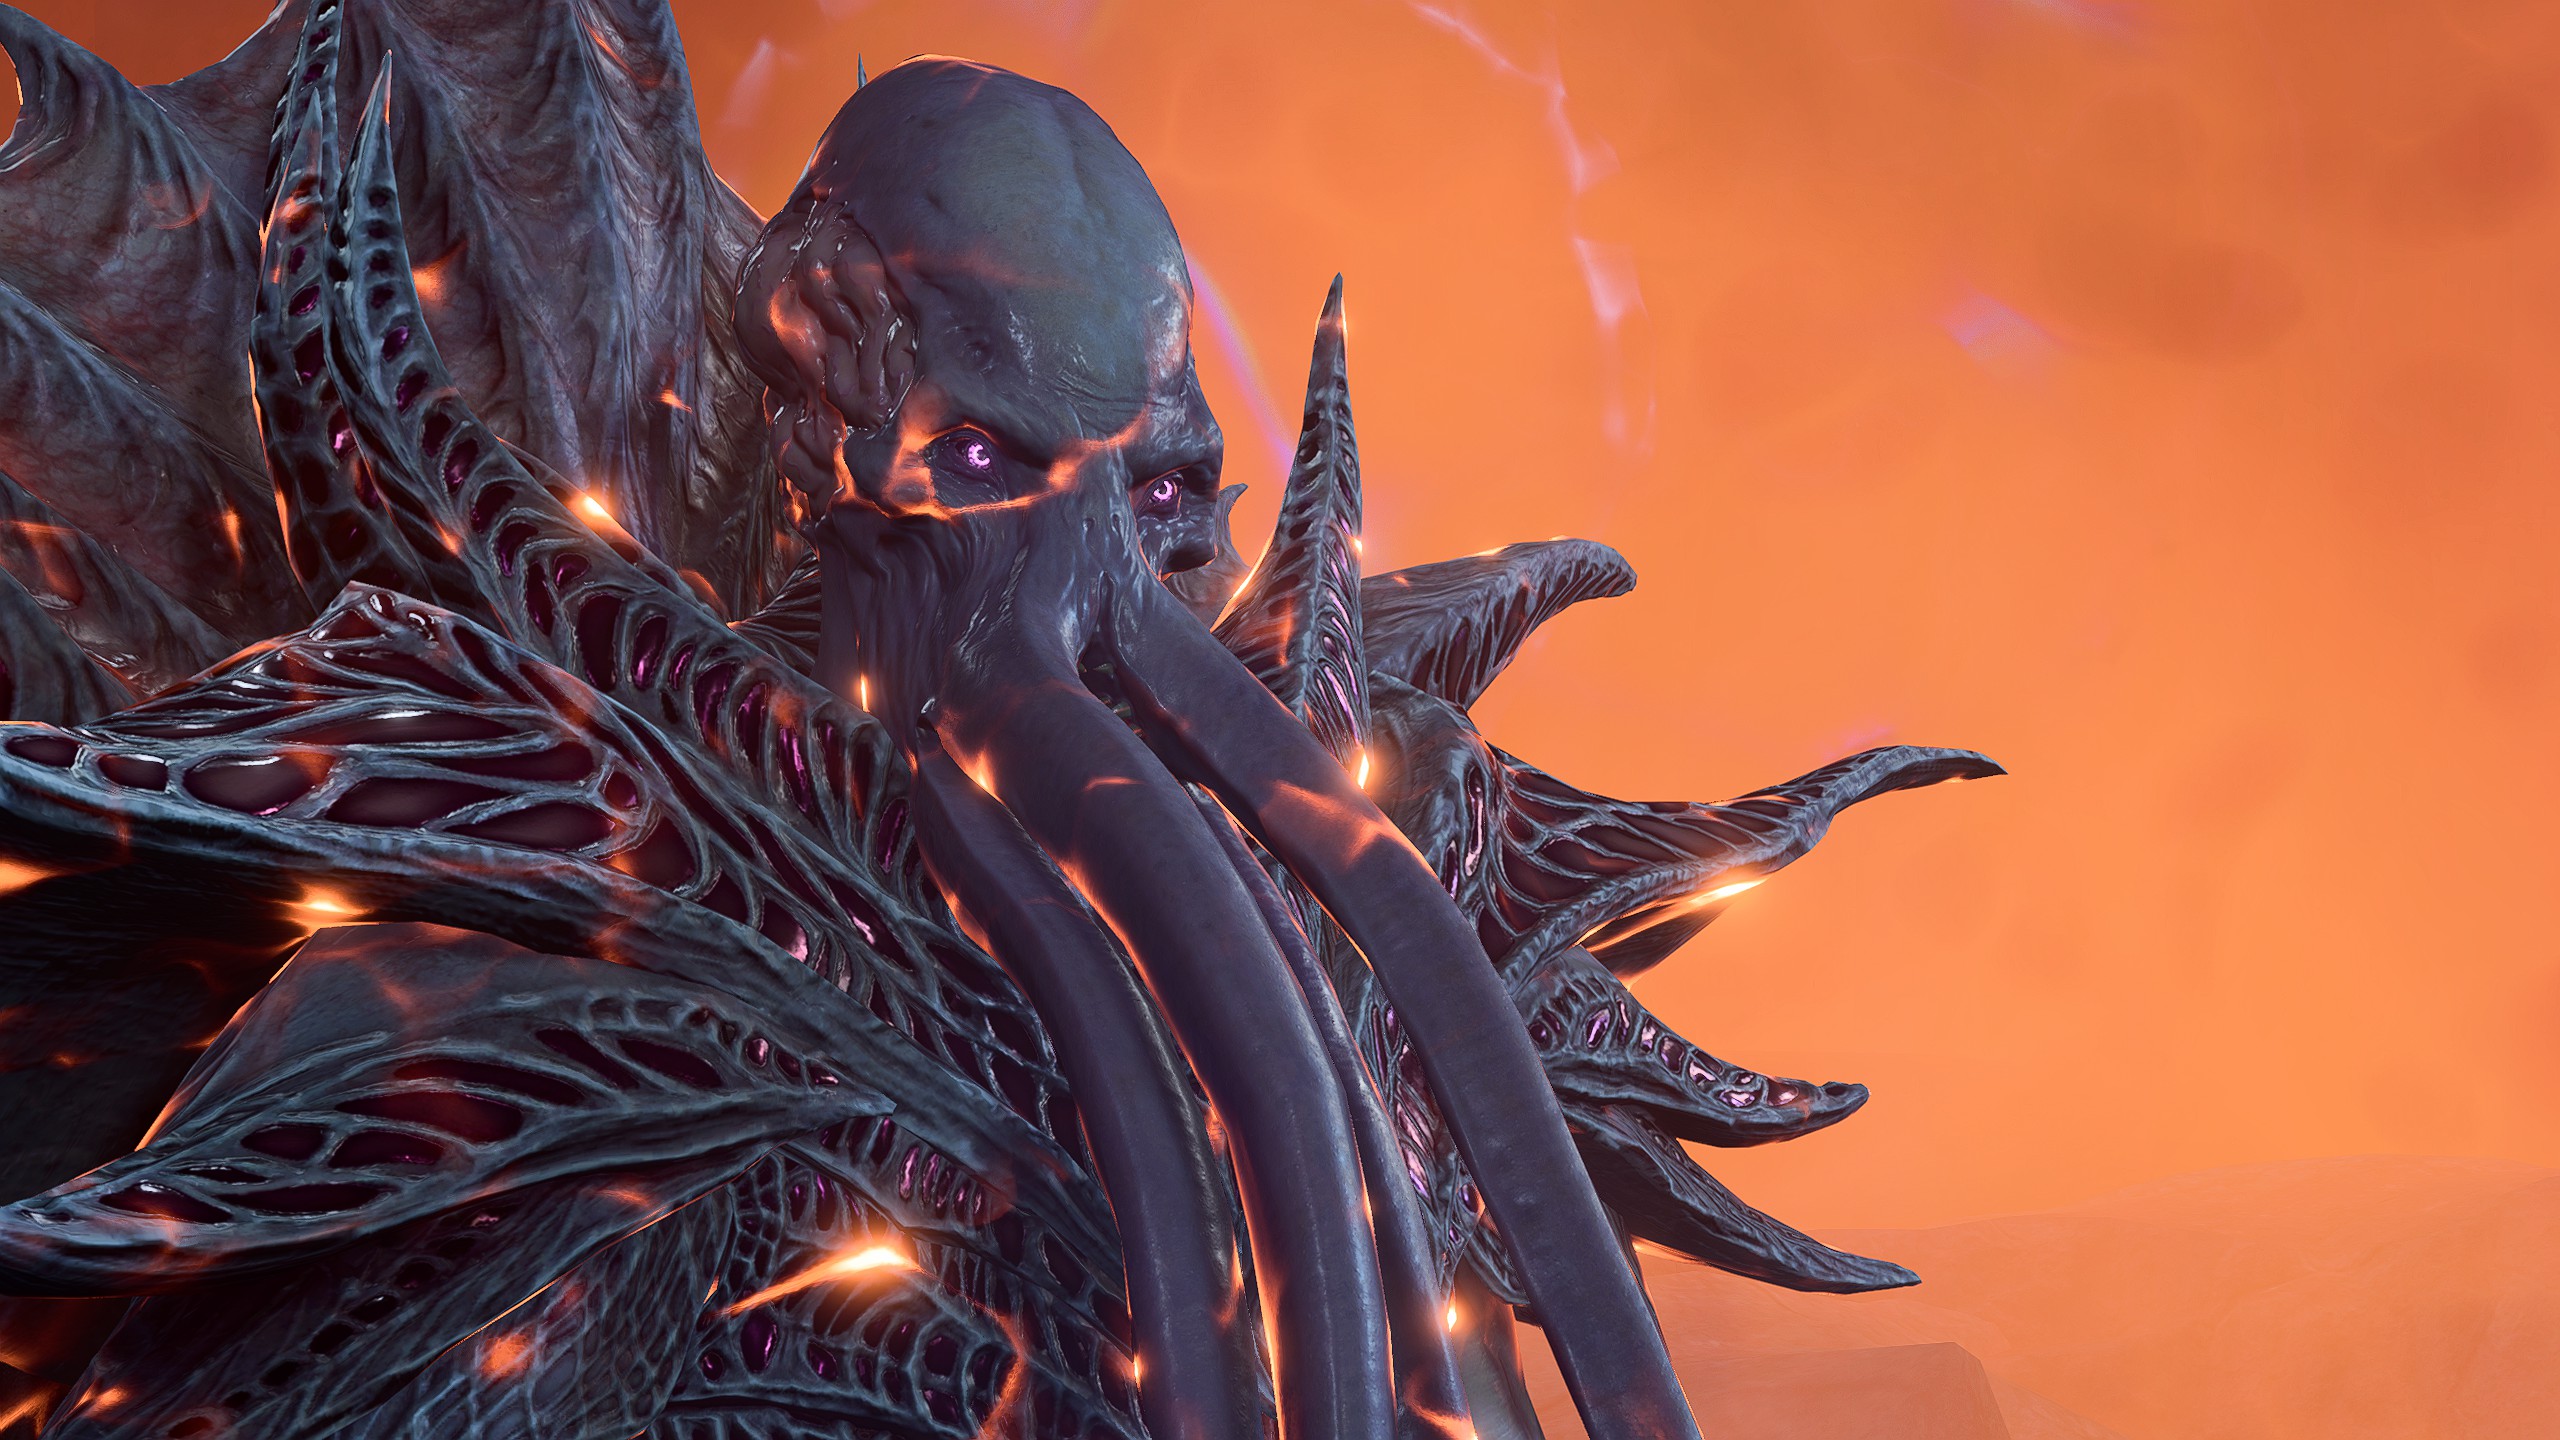 An illithid against a glowing orange sky